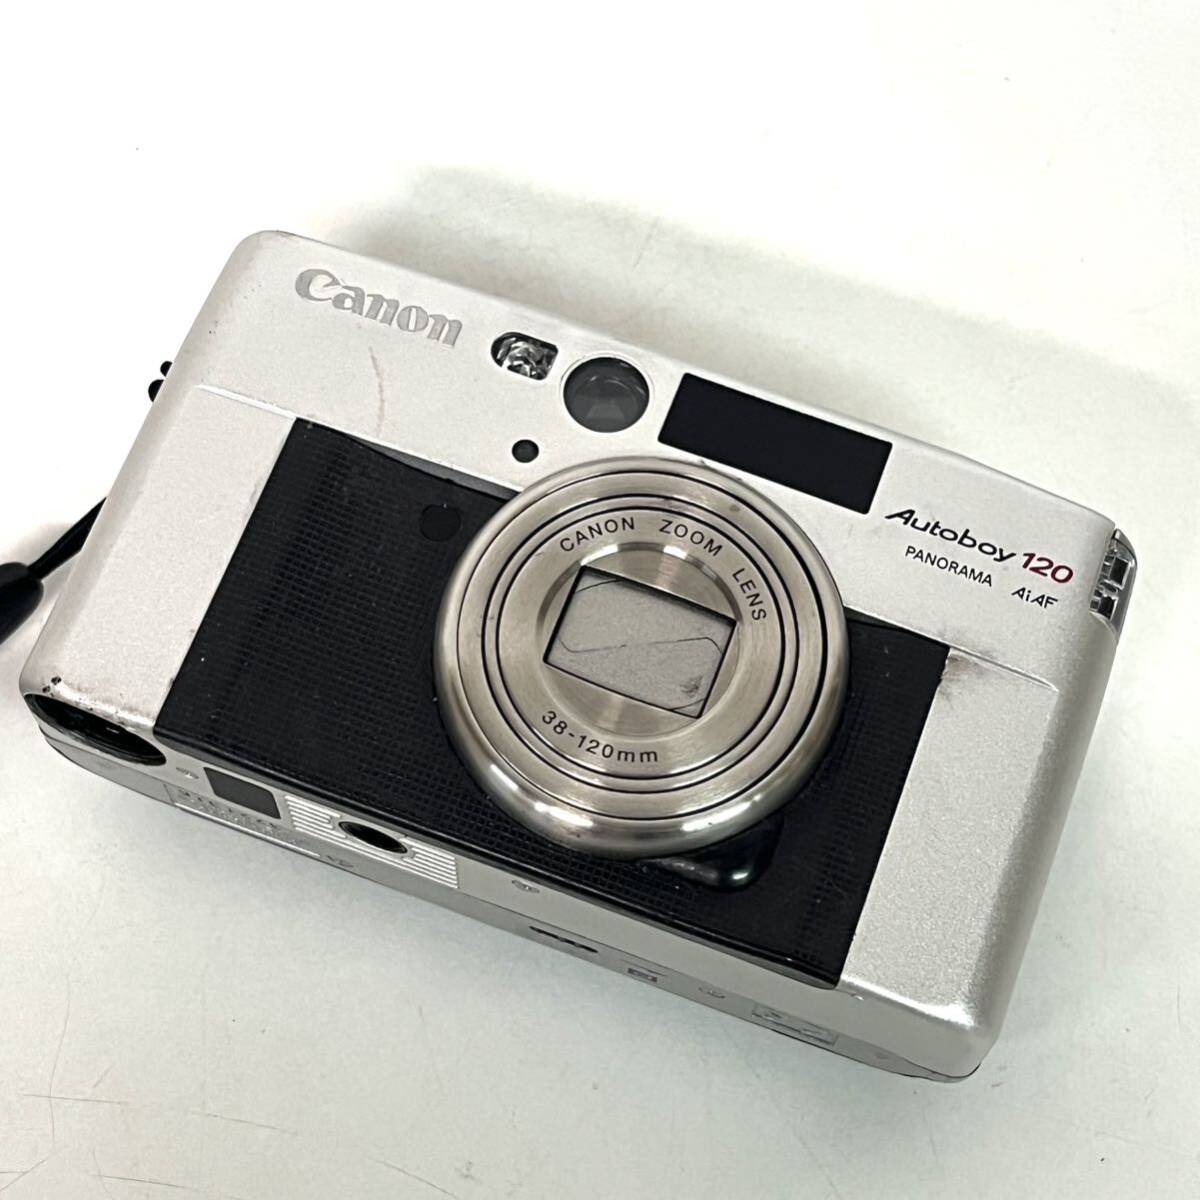 CANON キヤノン AUTOBOY 120 PANORAMA AIAF 38-120 ジャンク フィルムカメラ コンパクトの画像1